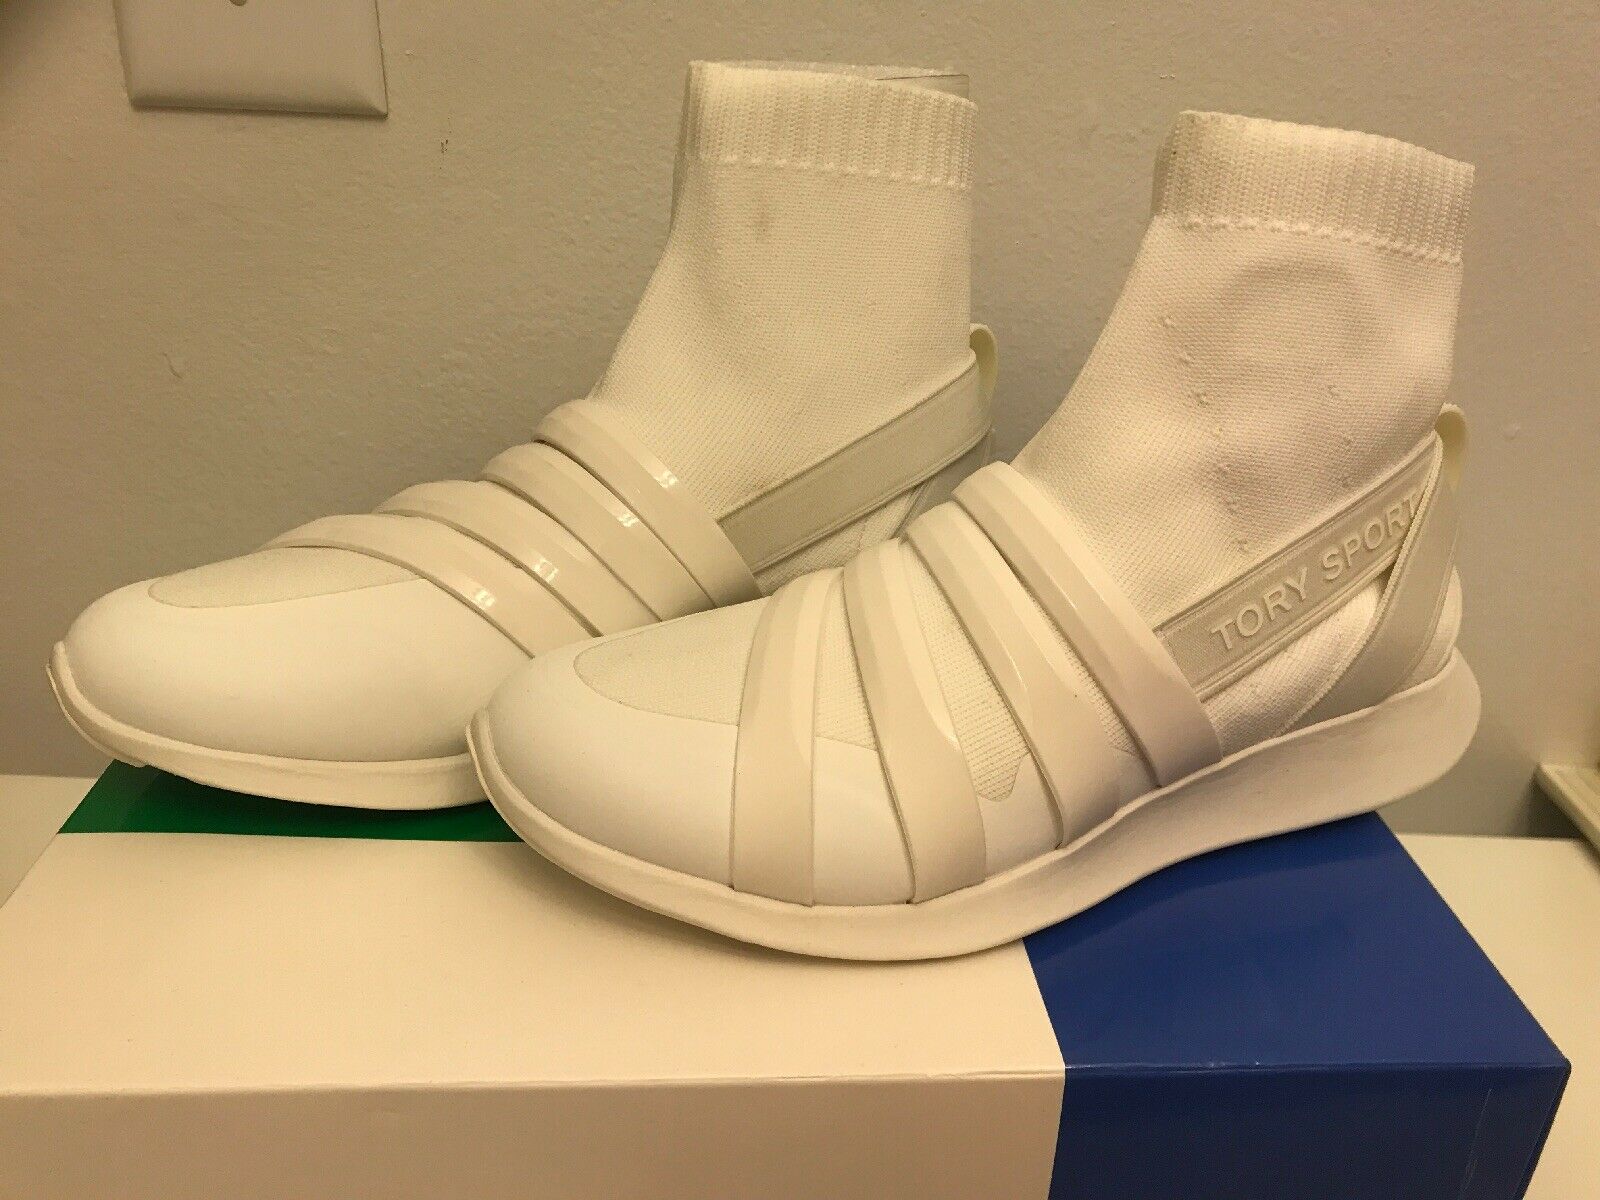 Tory Burch Banner Sock Sneakers Shoes White Size 8 NIB